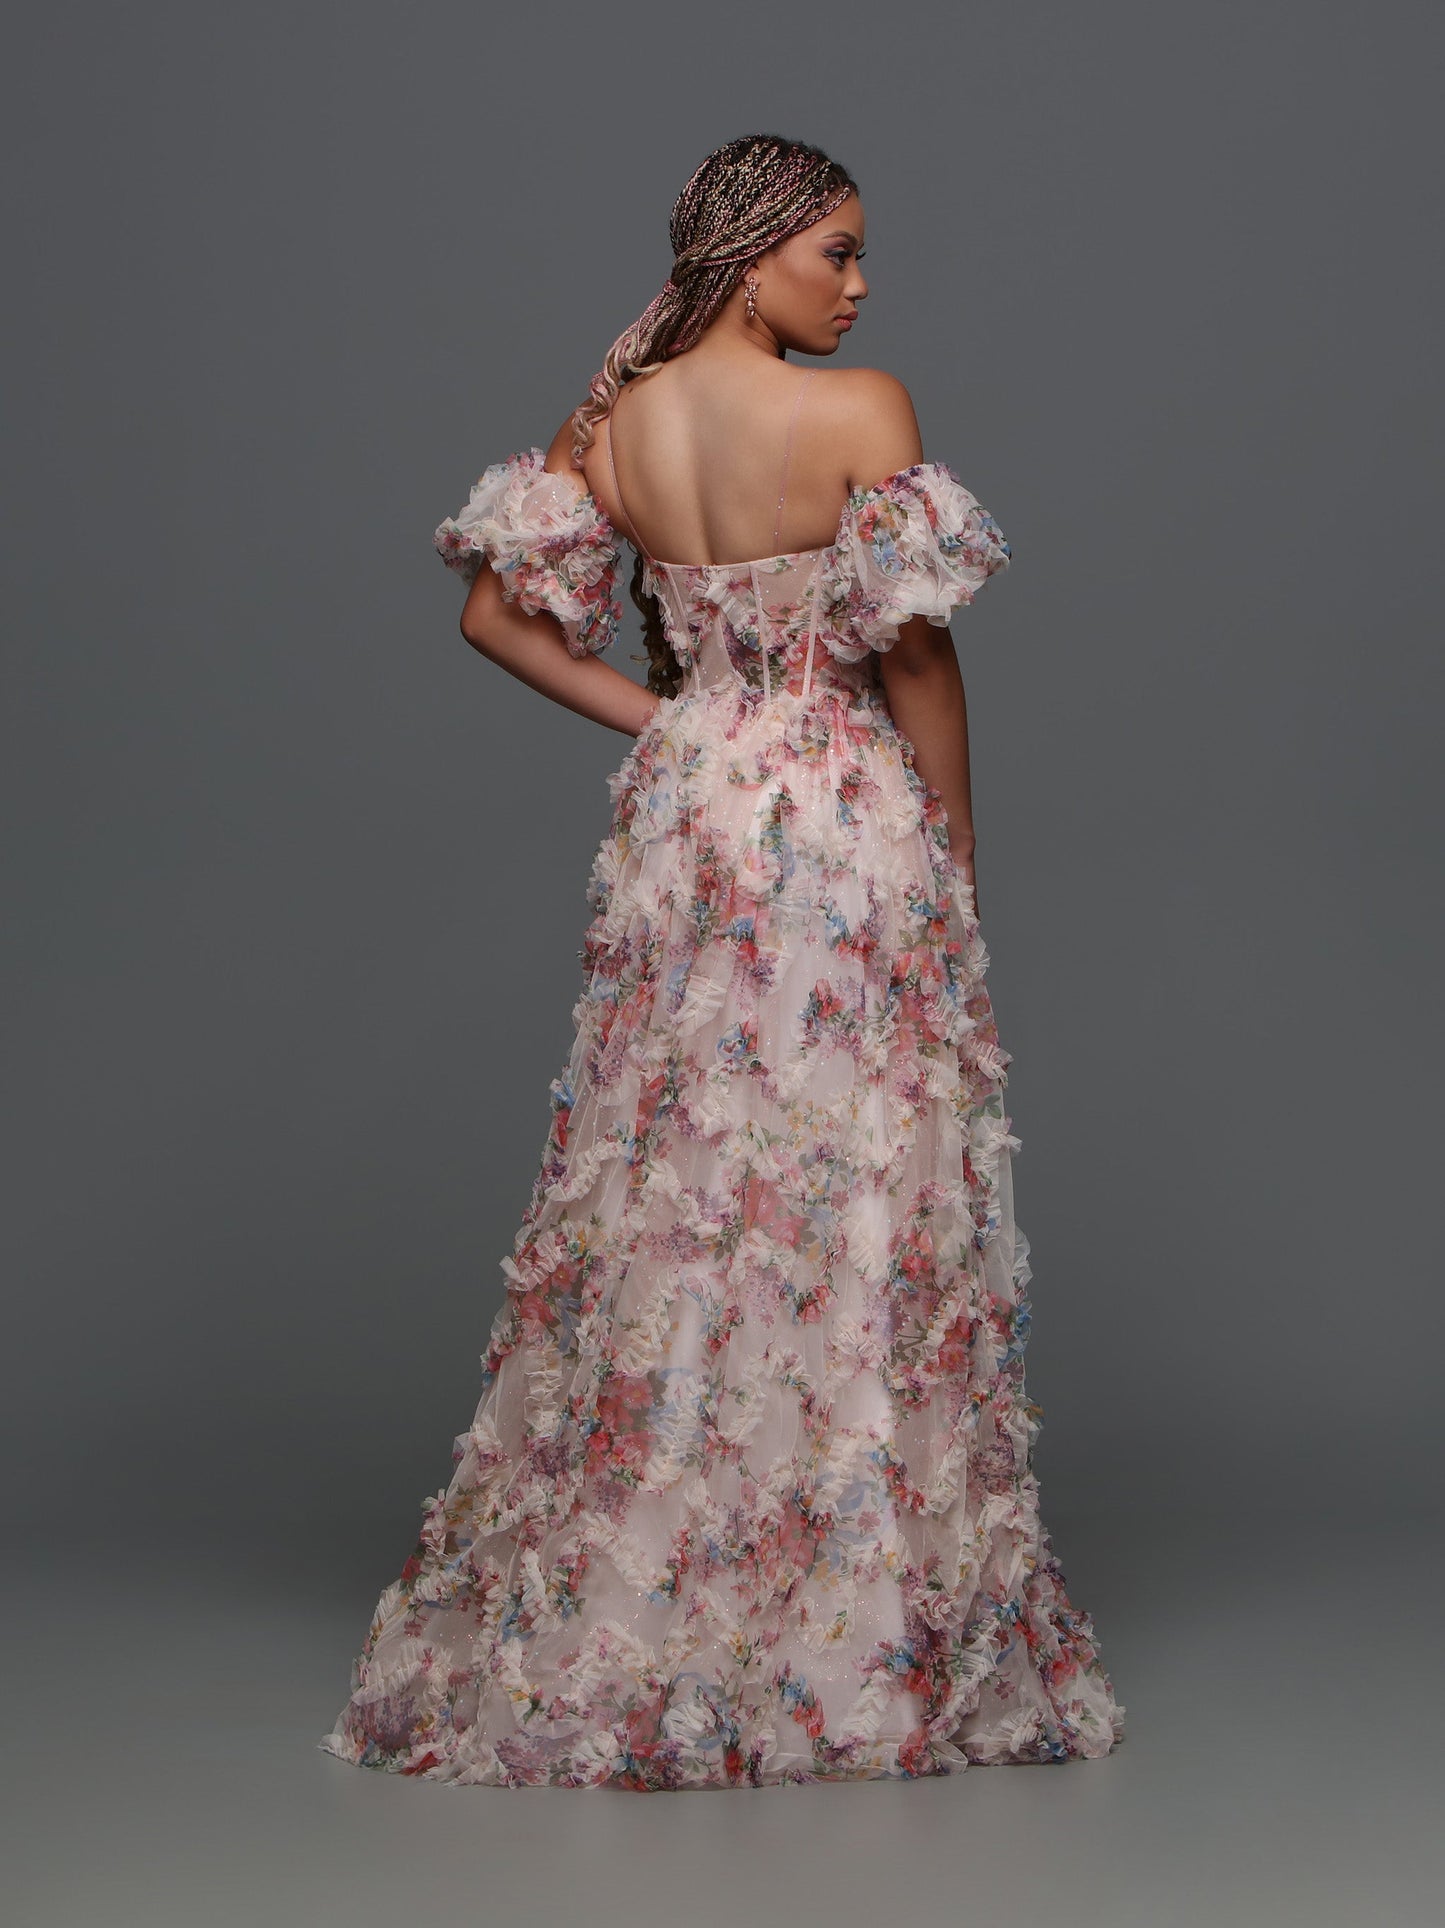 Experience elegance and grace with the Davinci F145 Floral Print Prom Dress. The stunning puff sleeves and A-line silhouette enhance your natural beauty while the sheer corset and shimmering pleats create a dreamy and ethereal look.